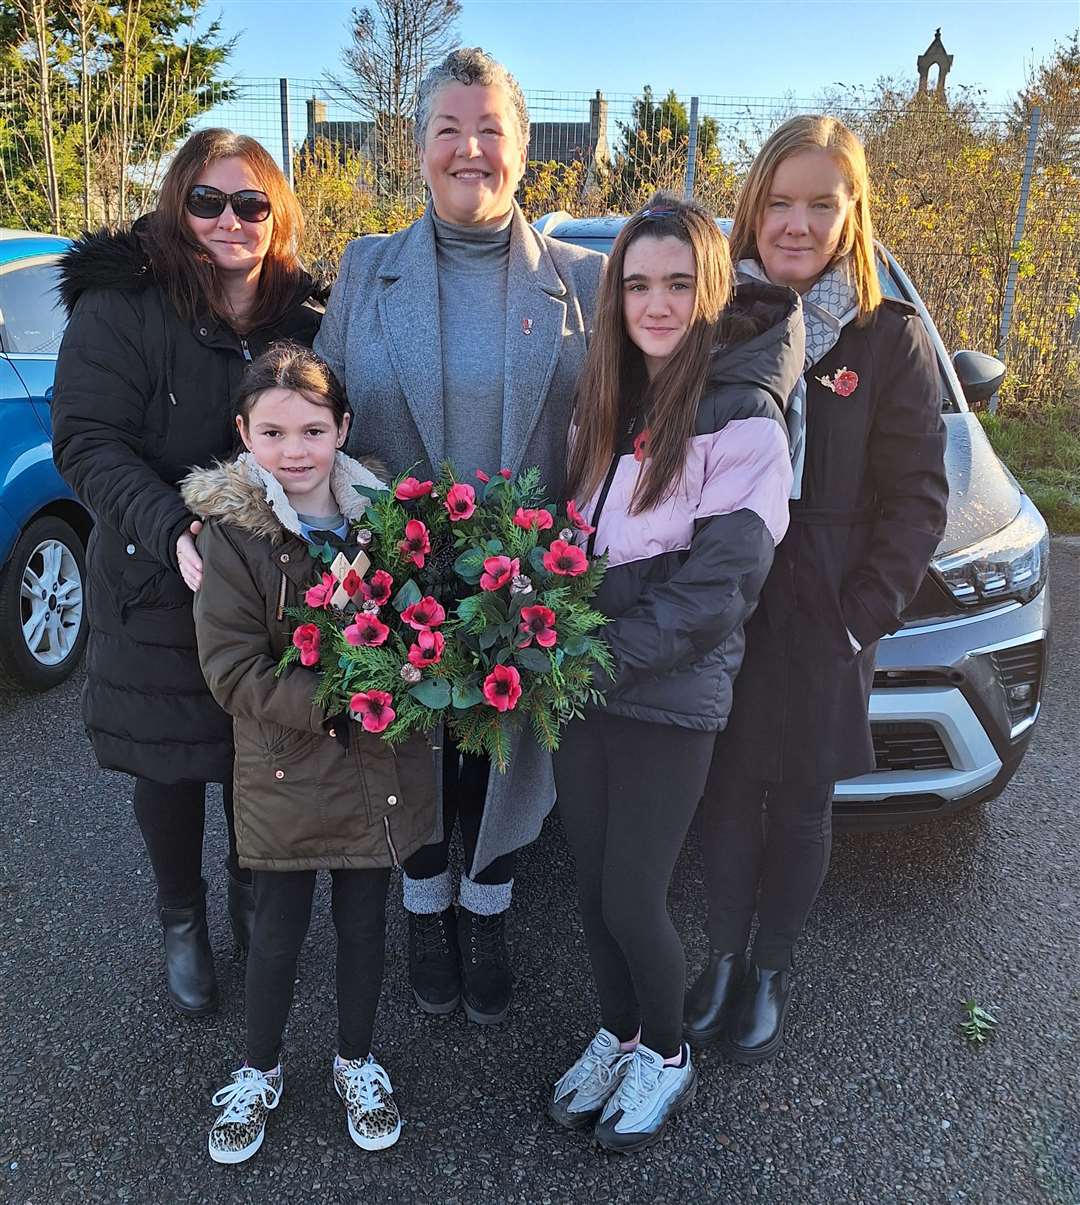 Debbie Jappy (front left) and Sophie Macleod-Sinclair laid a wreath on behalf of Brora Primary School and Nursery. They were accompanied by school staff members, back from left, Ruth Macleod, Gina Rankin and head teacher Mairi Scott.